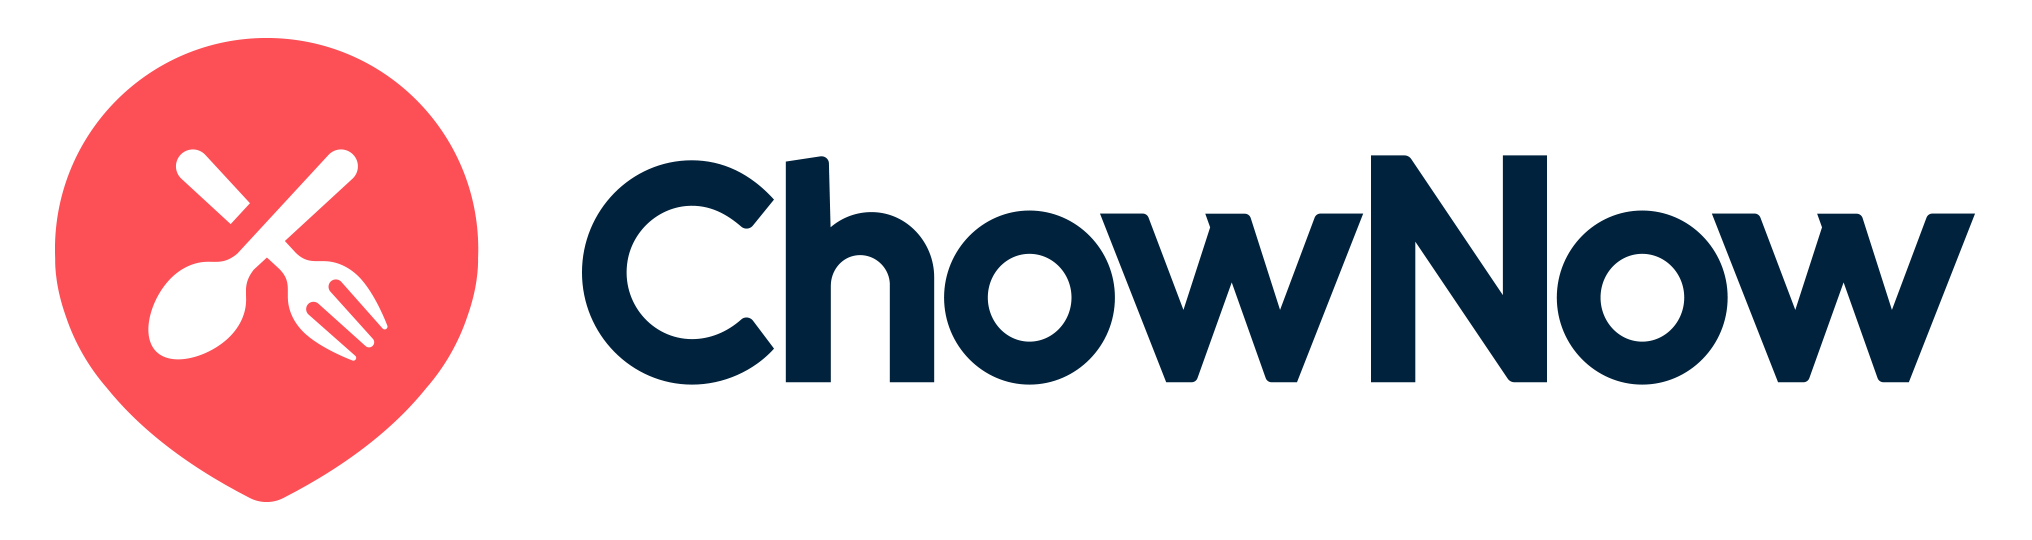 Design jobs at ChowNow